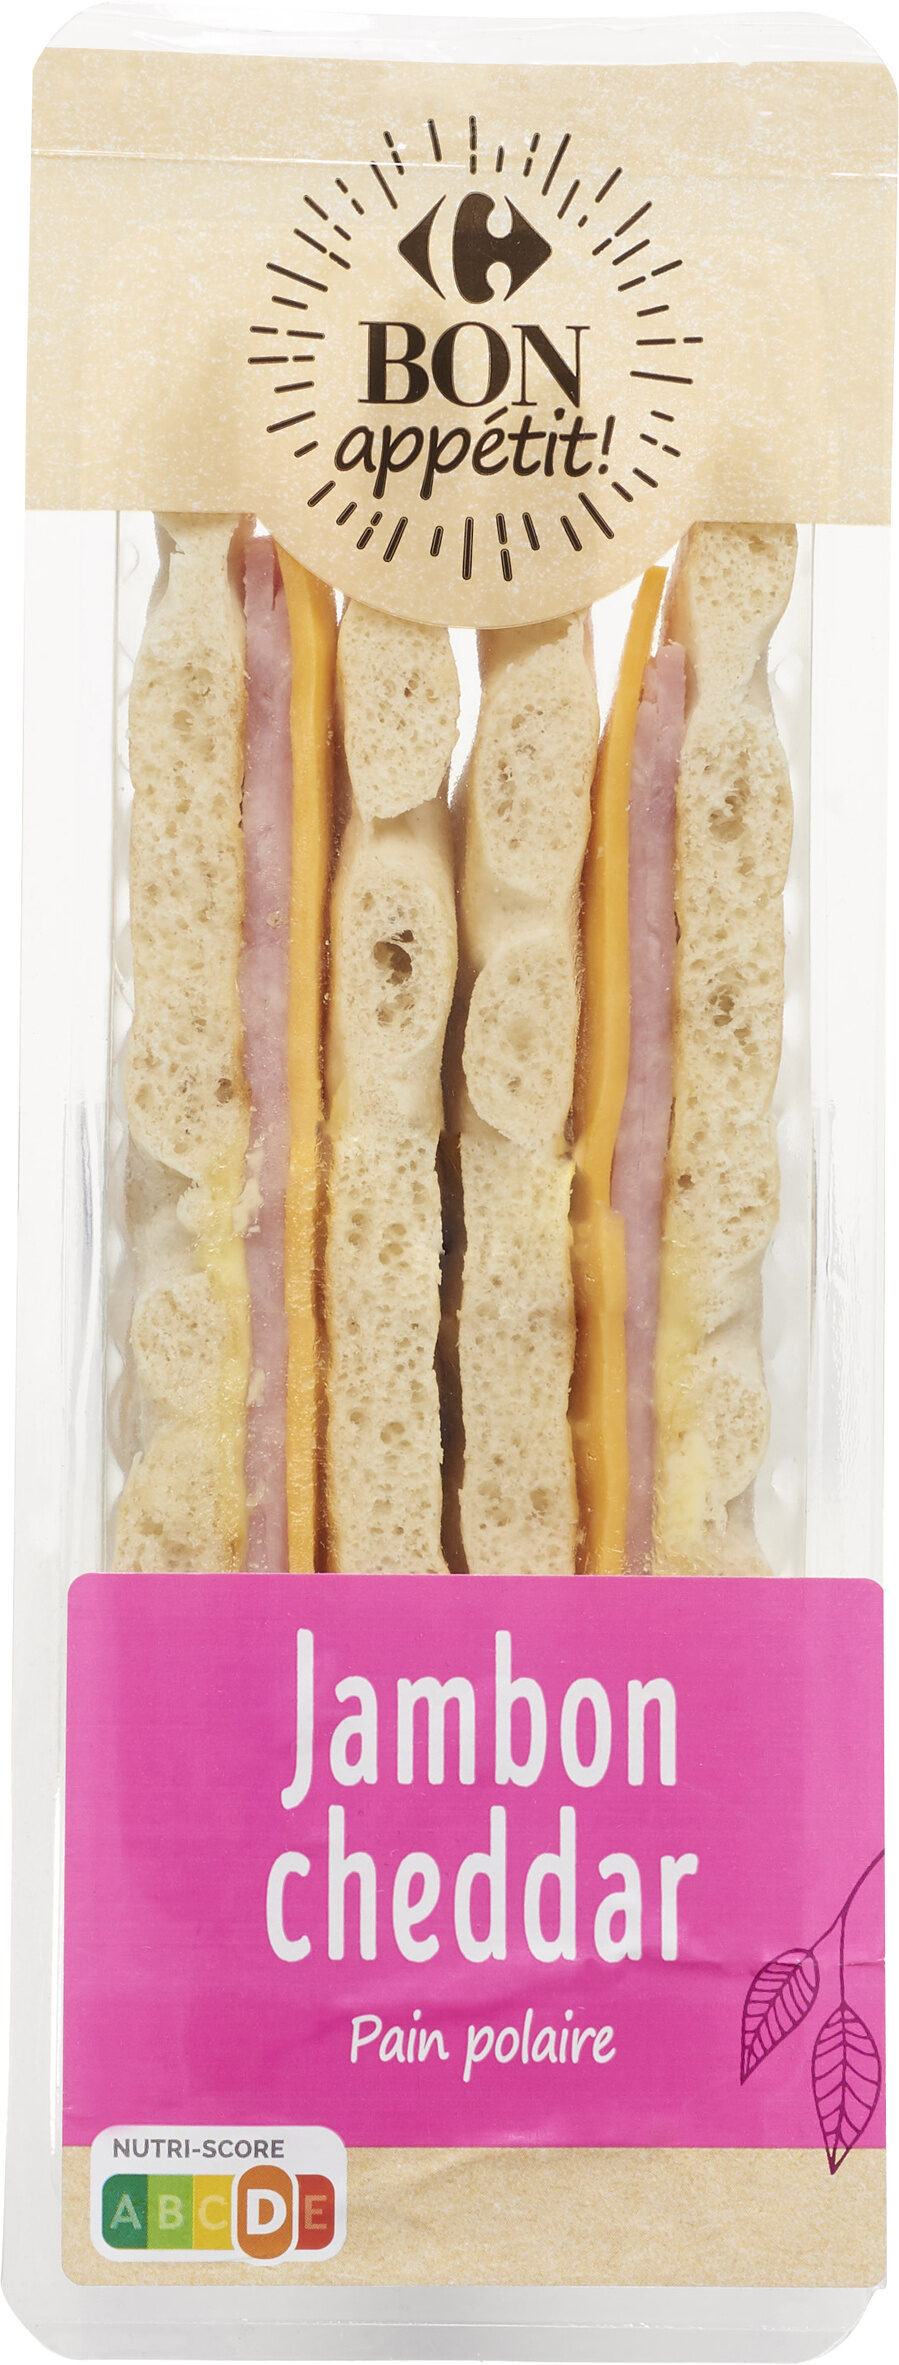 Jambon Cheddar pain polaire - Product - fr